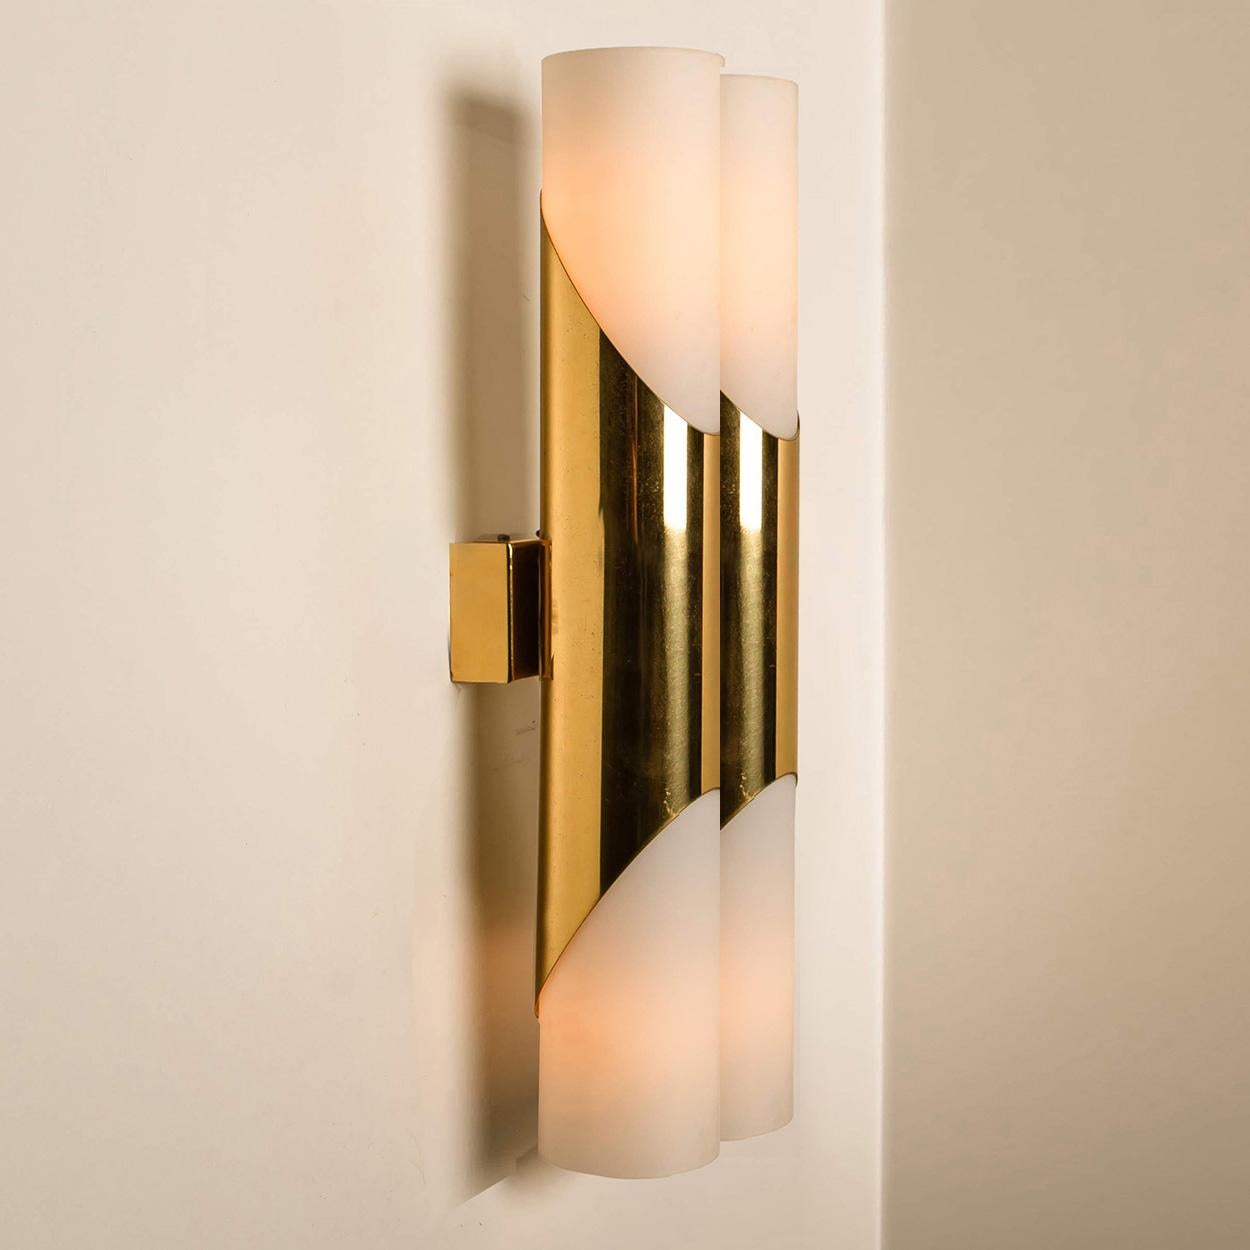 Several Wall Sconces or Wall Lights in the Style of RAAK Amsterdam, 1970 For Sale 3